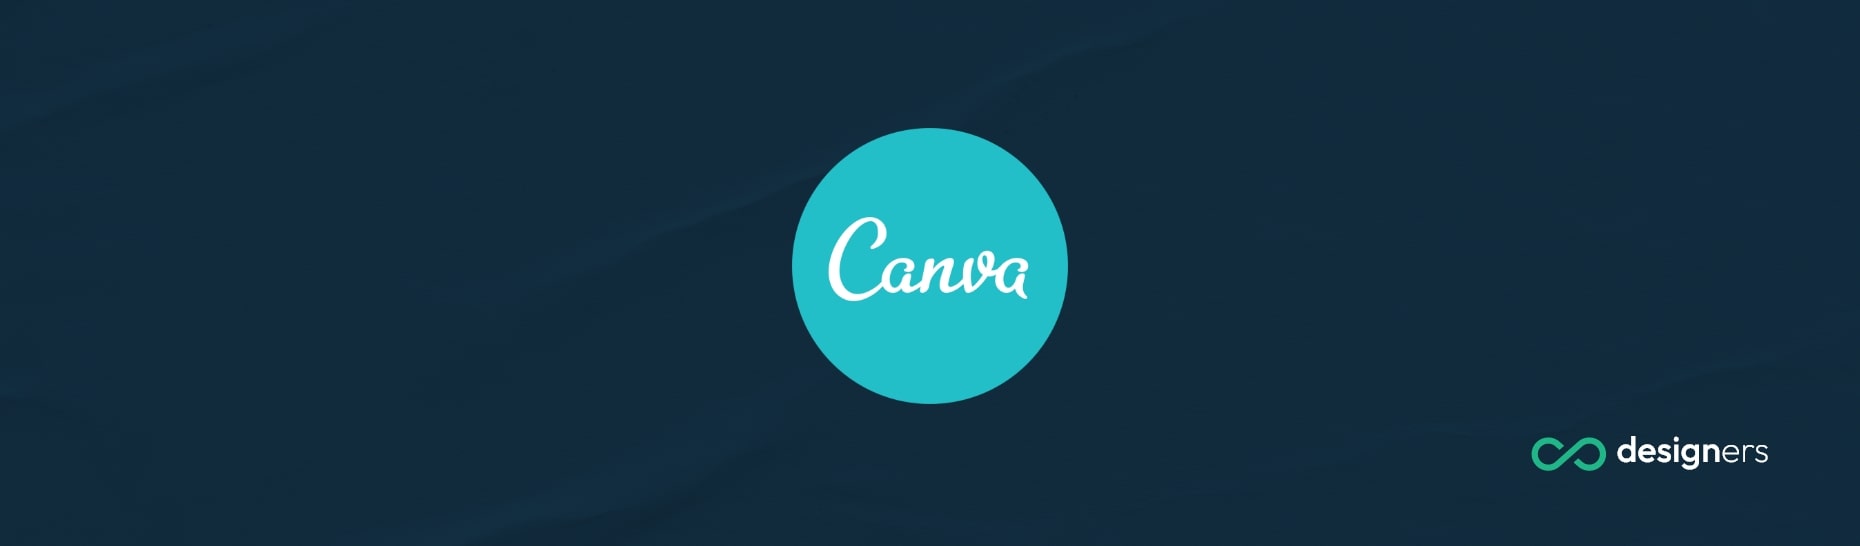 How Do You Get Gold Text in Canva?